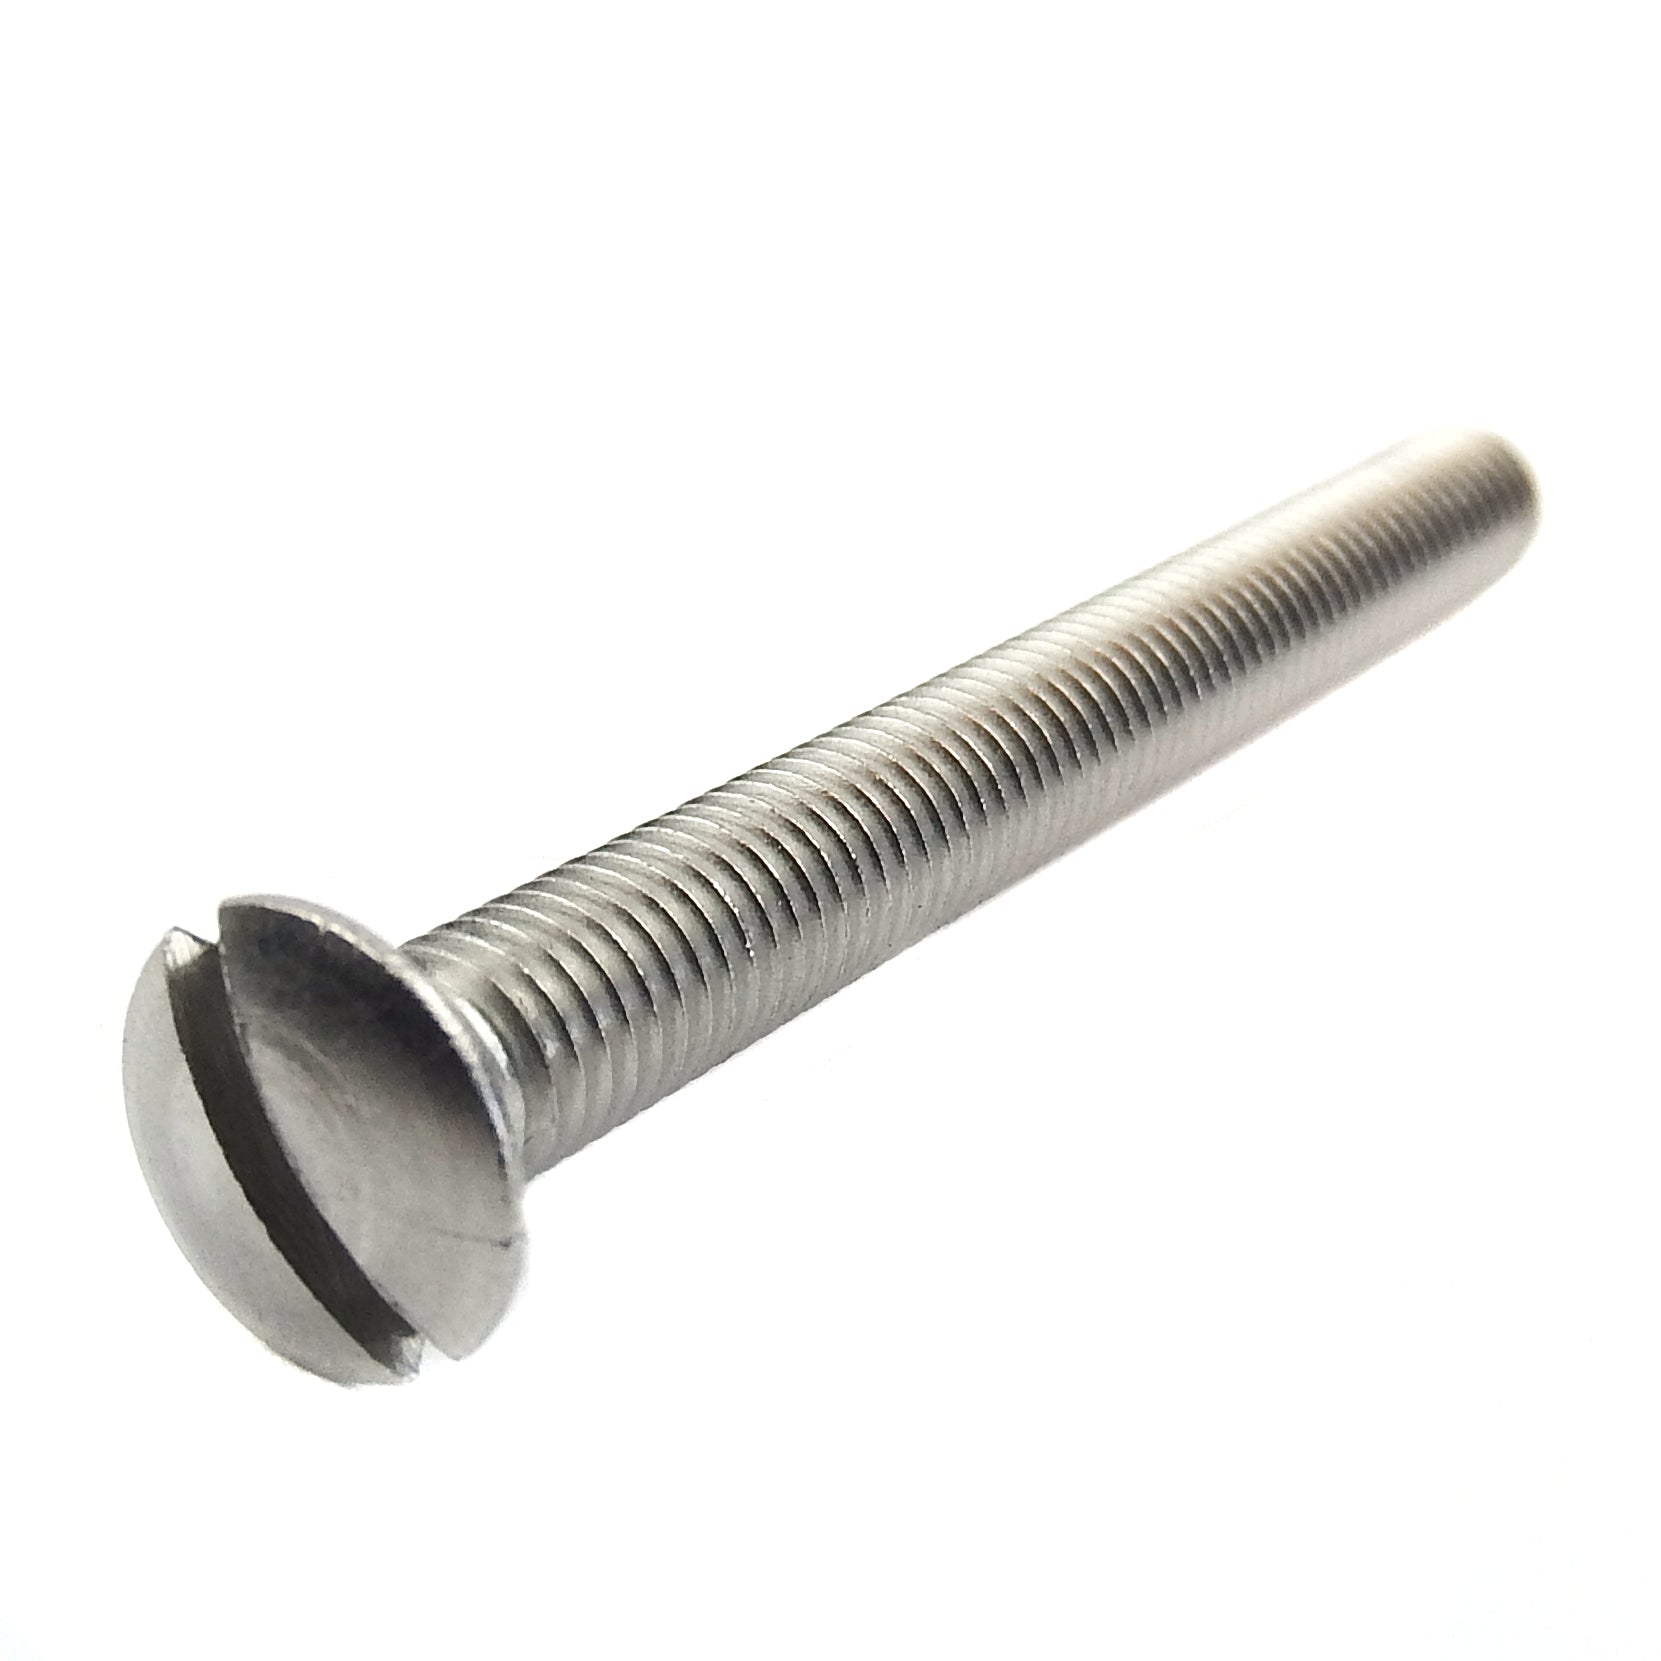 Counter Sunk Raised Screw M5 x 50mm Stainless